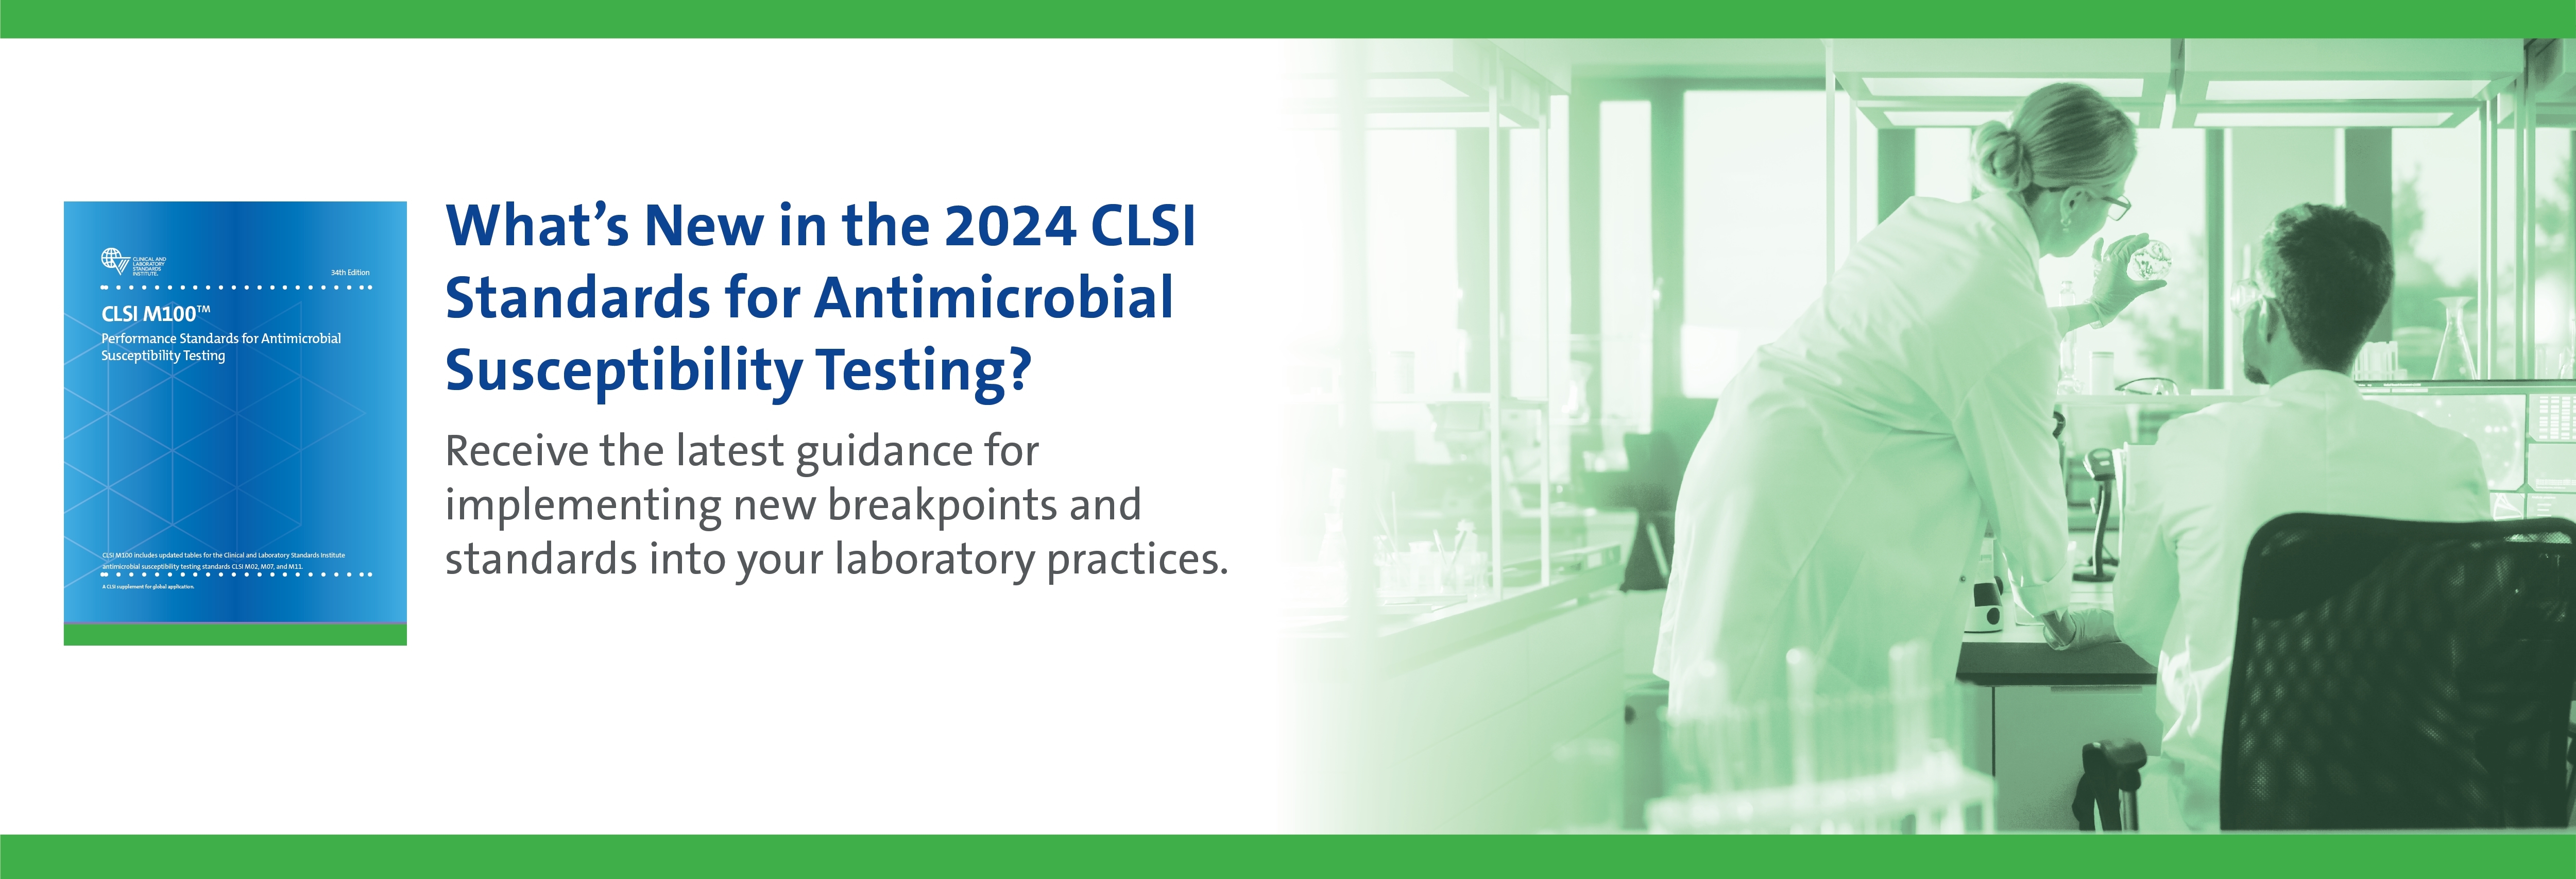 What’s New in the 2024 CLSI Standards for Antimicrobial Susceptibility Testing?